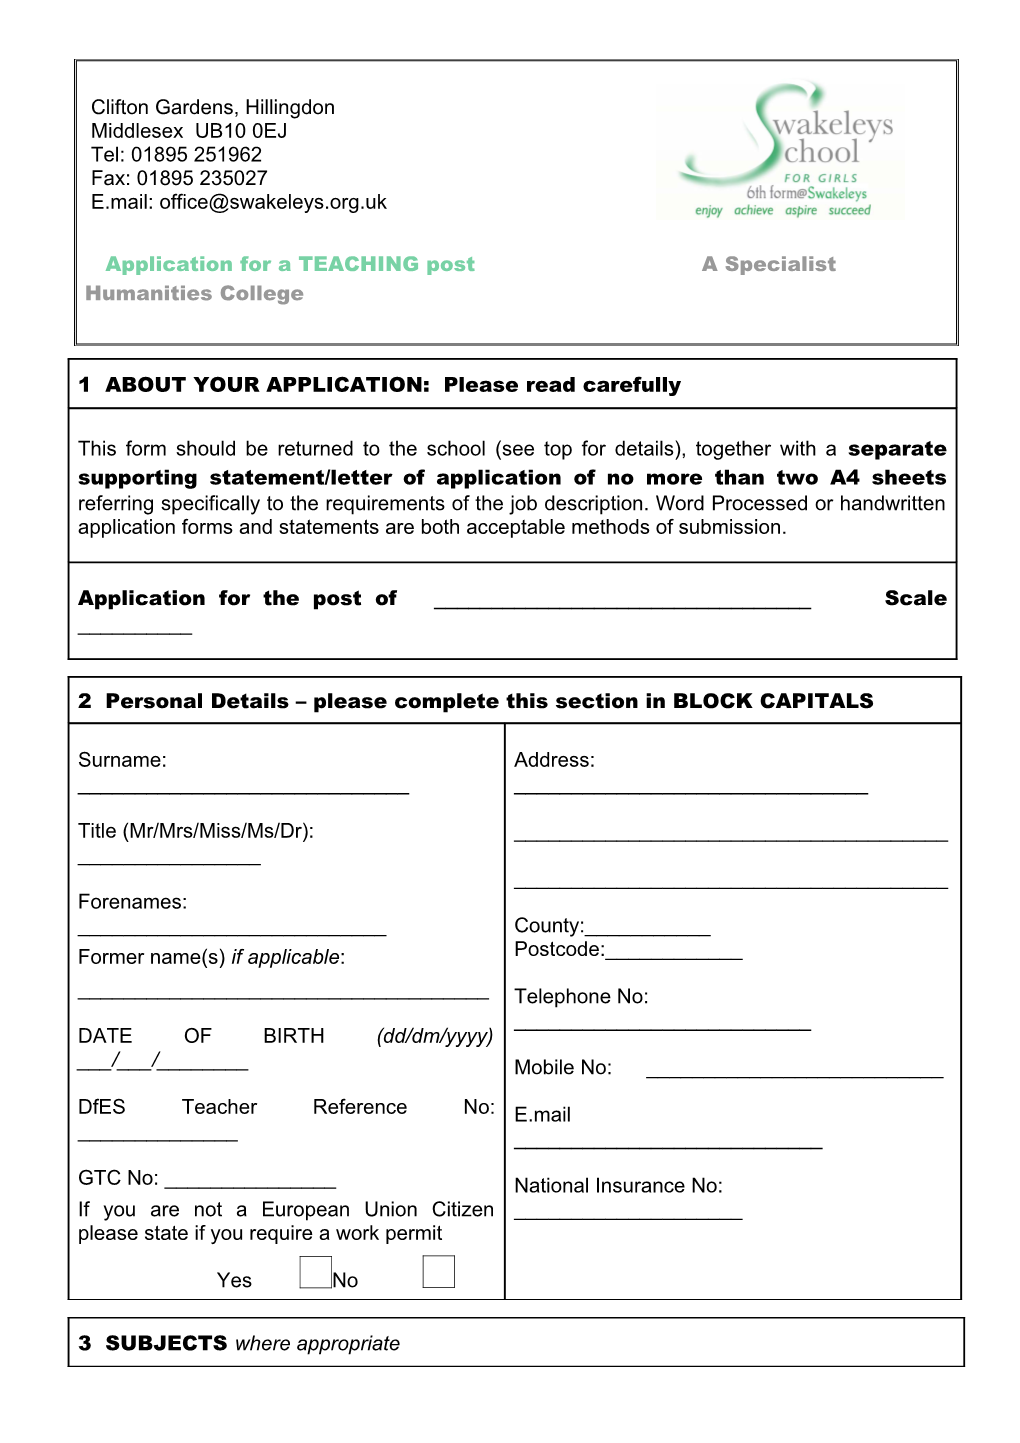 Please Return This Application Form To